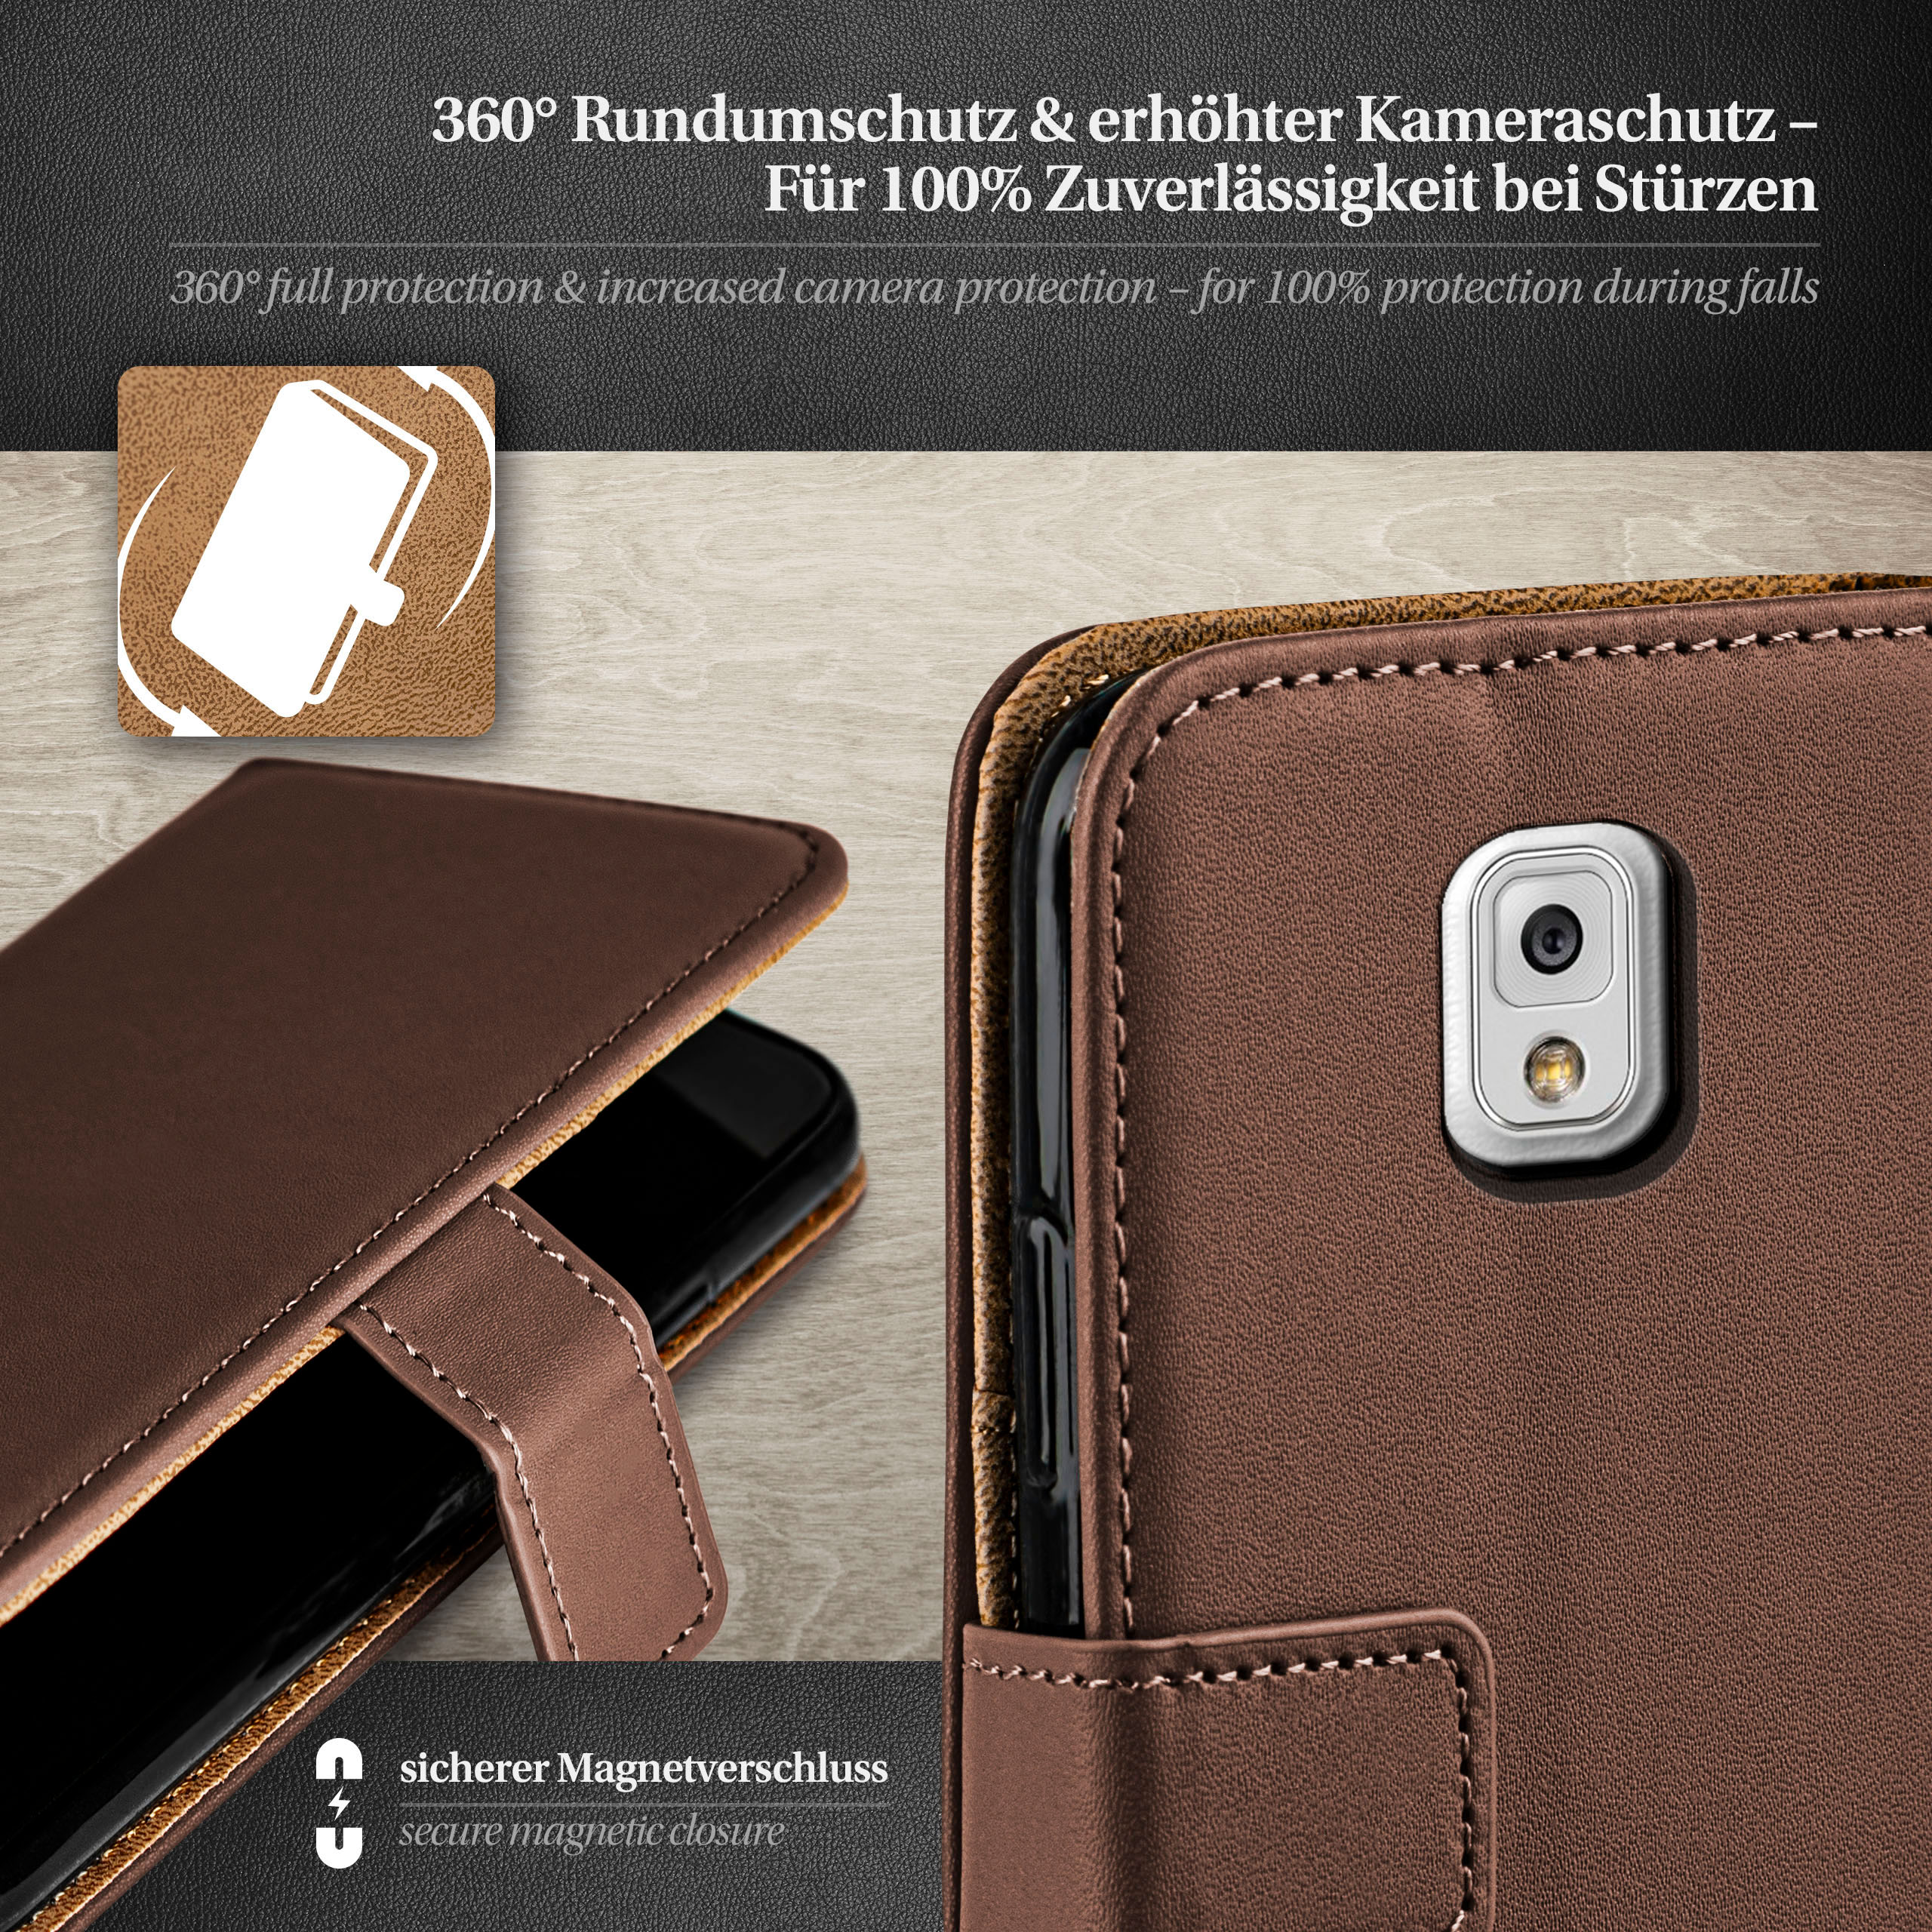 MOEX Book Bookcover, Note Samsung, Oxide-Brown Case, Galaxy 3